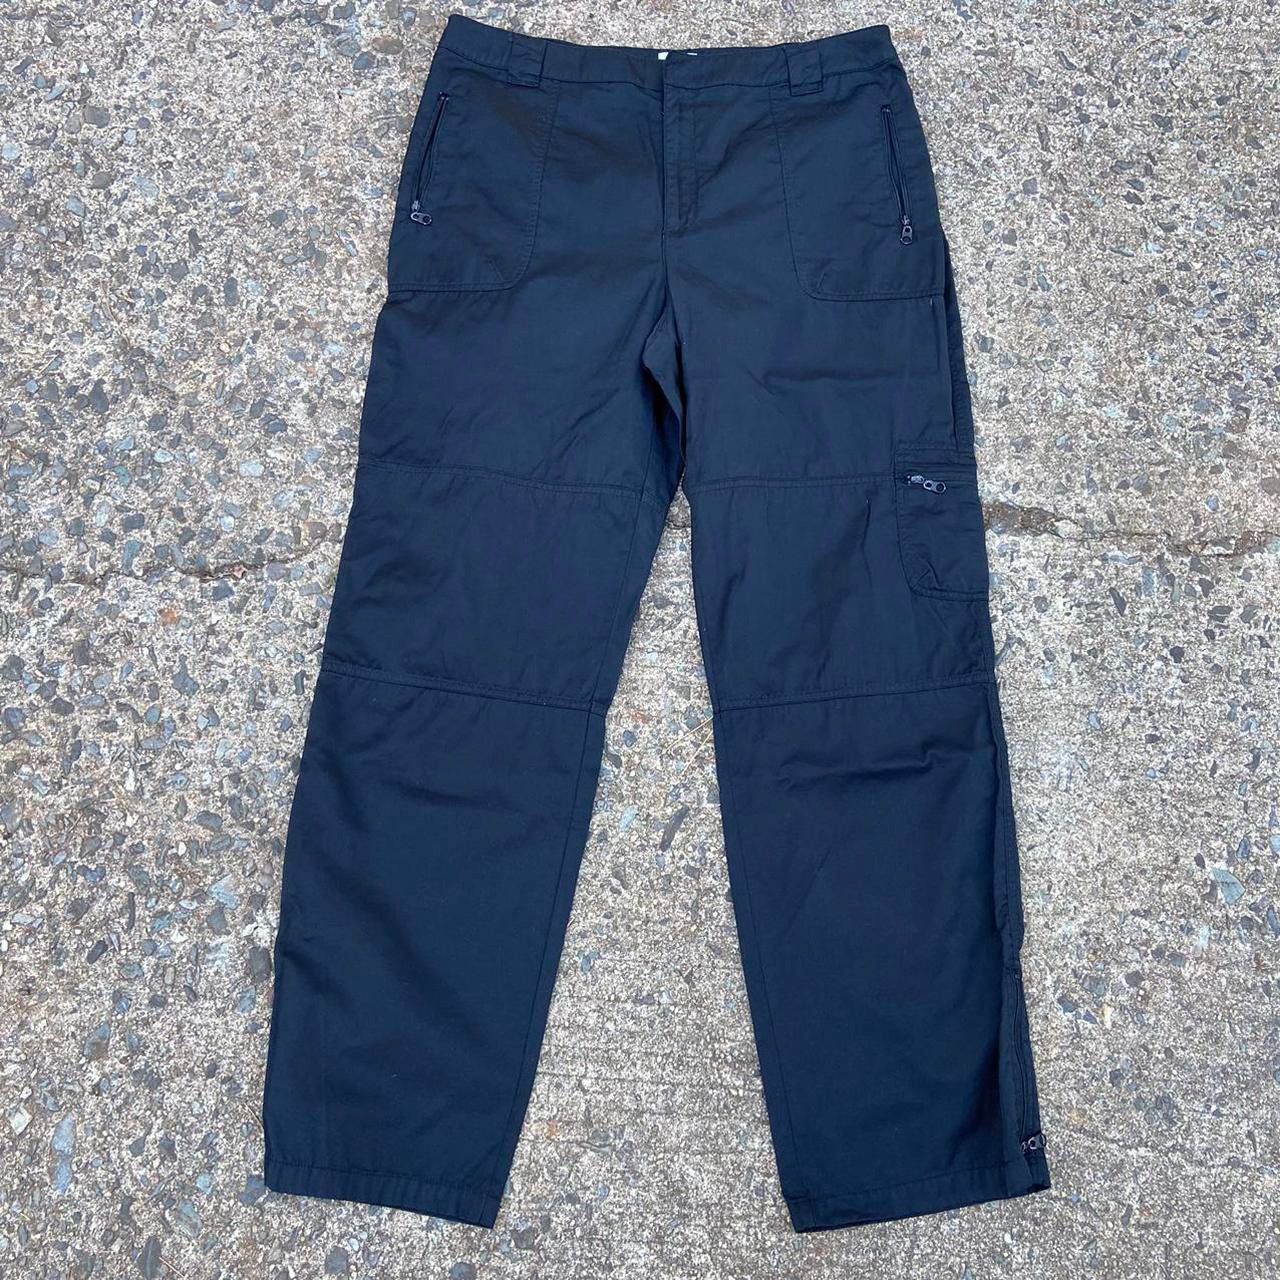 Streetwear Chicos Tactical Double Front Pants | Grailed